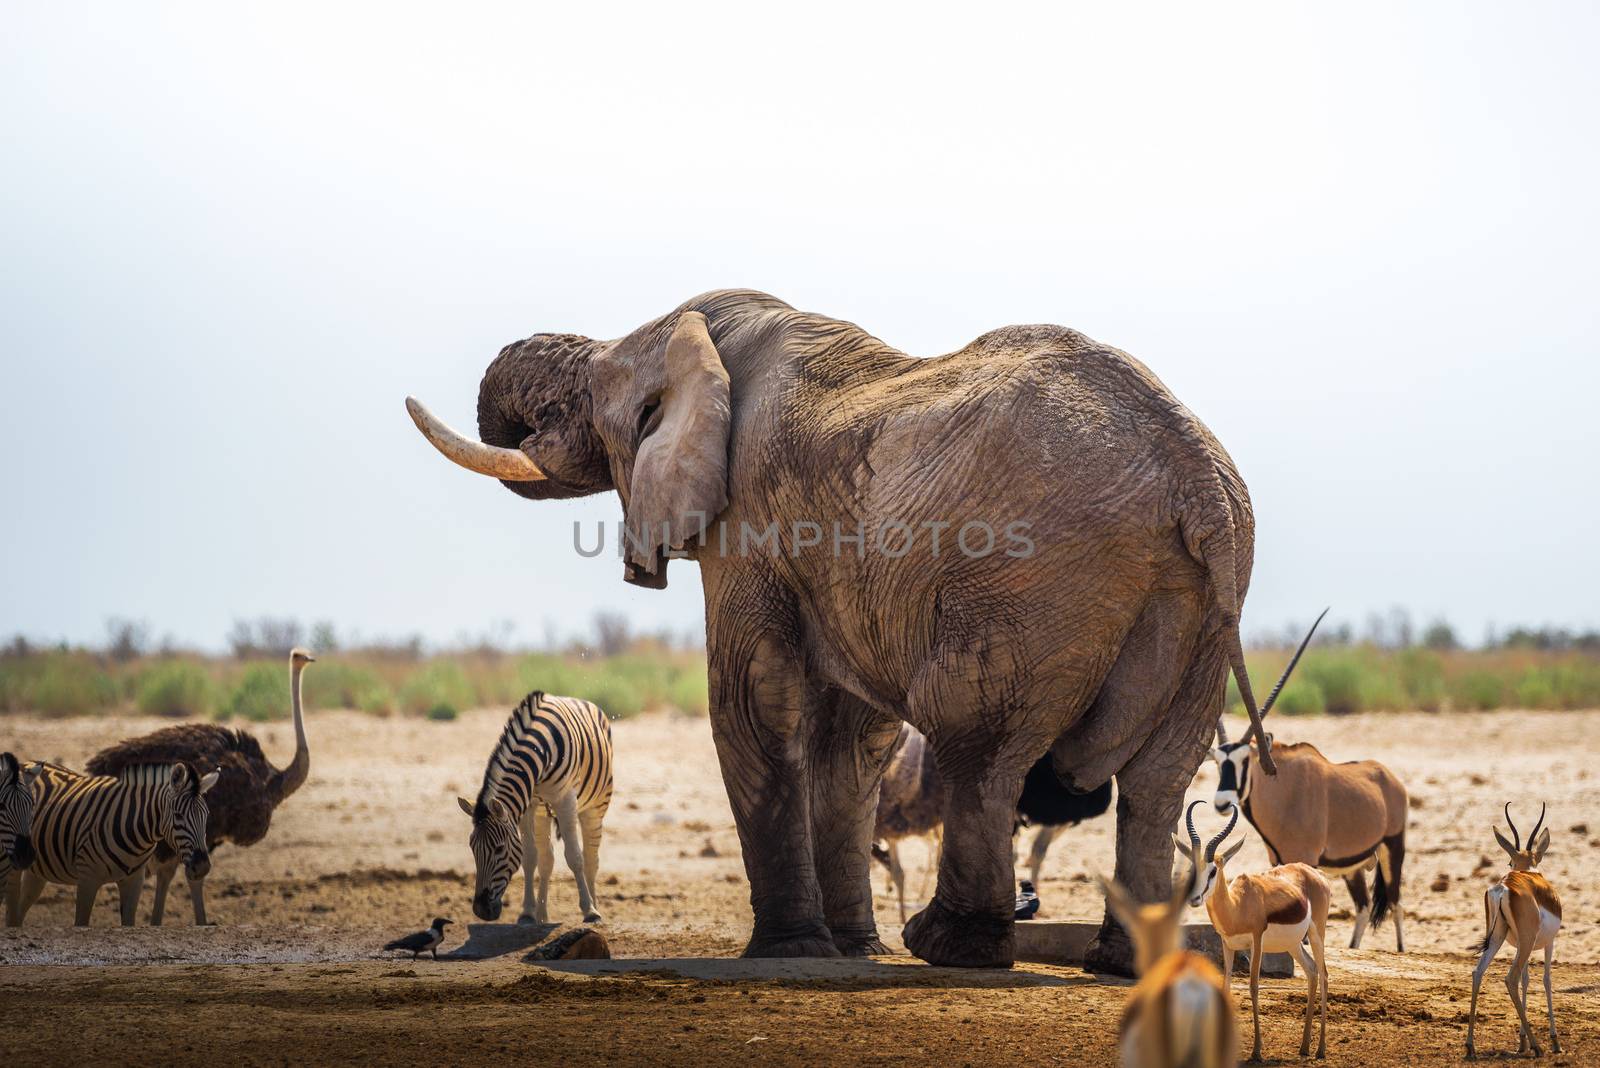 African elephant drinks water at a waterhole in Etosha National Park, Namibia, surrounded by other animals. Etosha is known for its waterholes overfilled with wild animals drinking water.